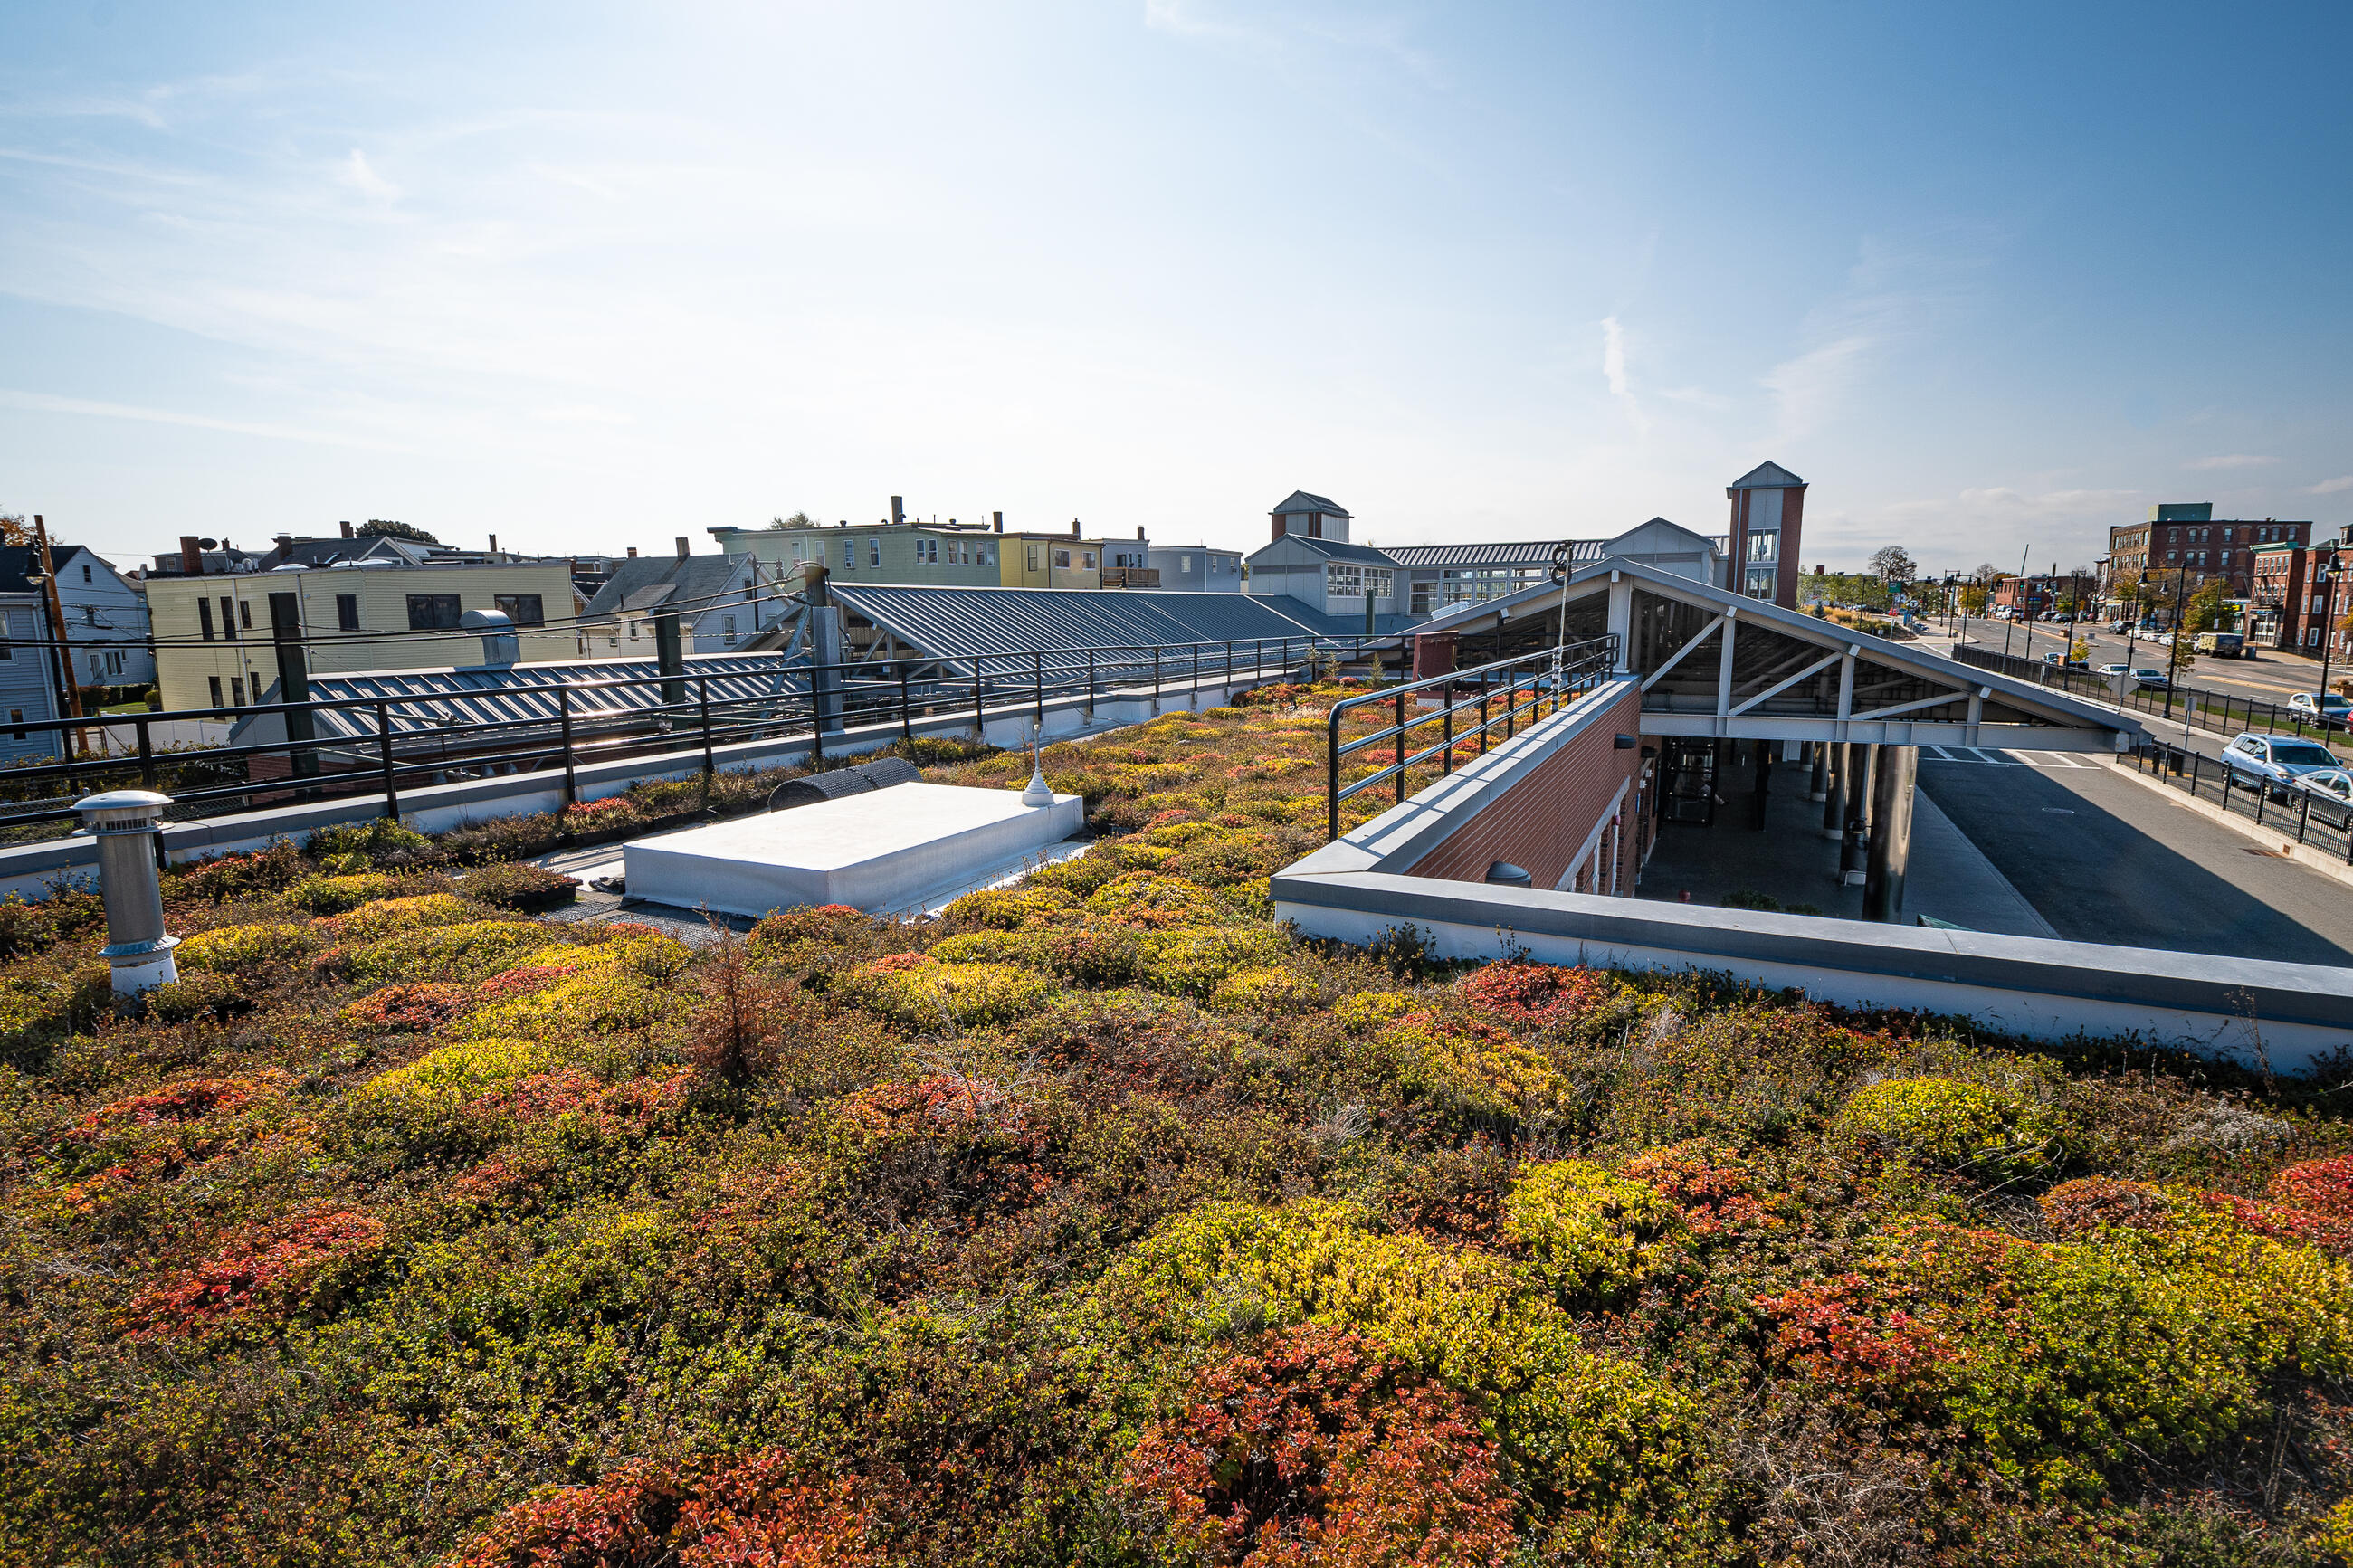 Green roof on Orient Heights Station reduces the amount of stormwater runoff entering the municipal storm system